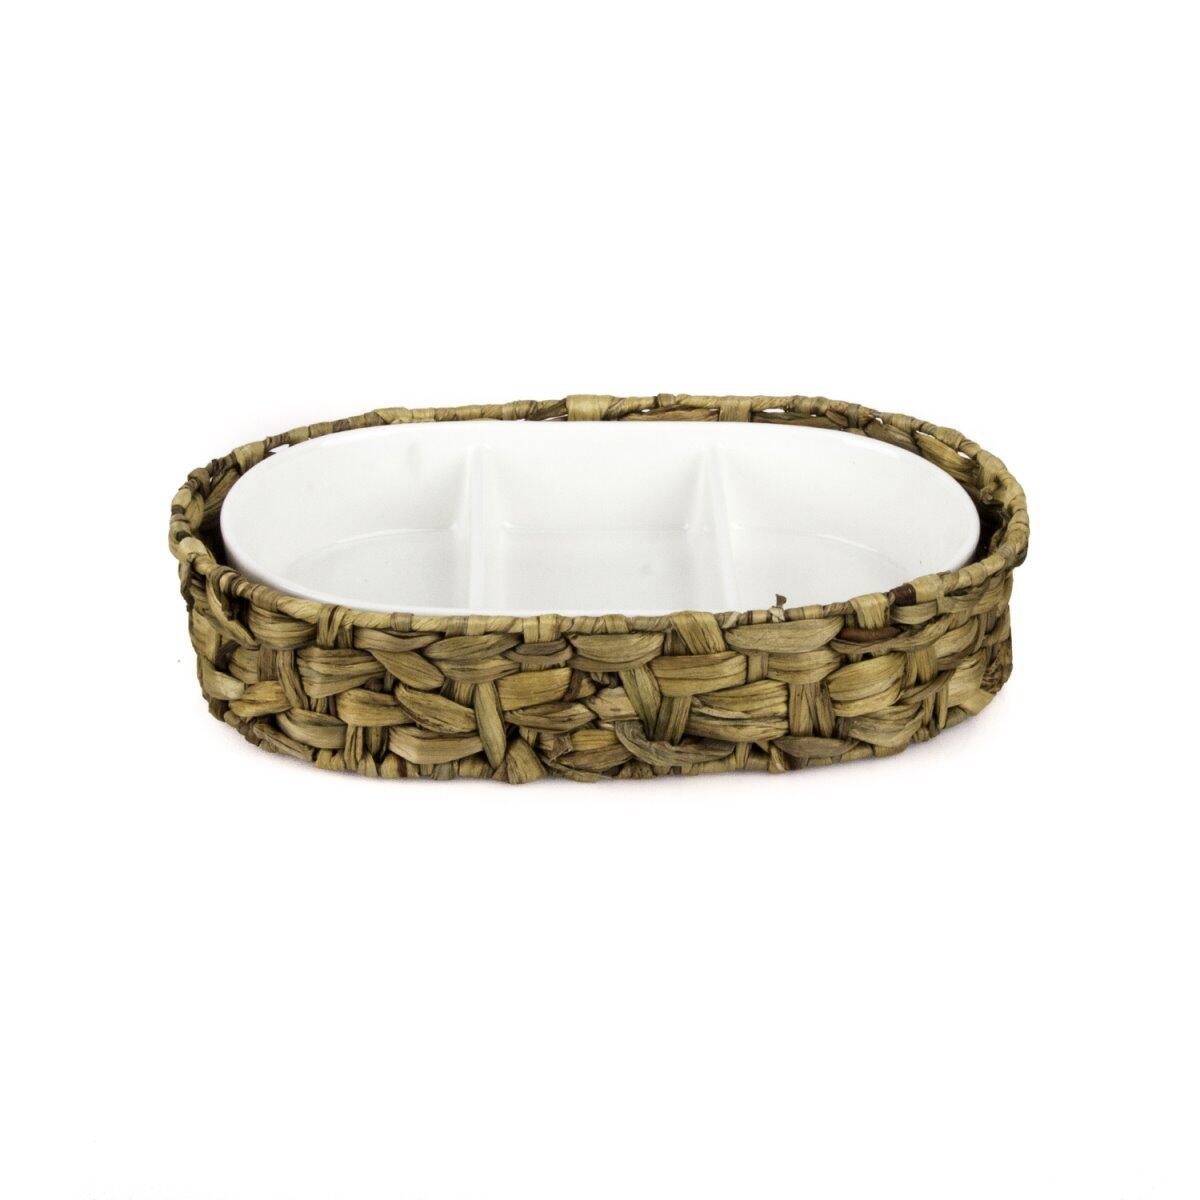 Ultraform Wicker Porcelain Oval Bowl with 3 Compartments